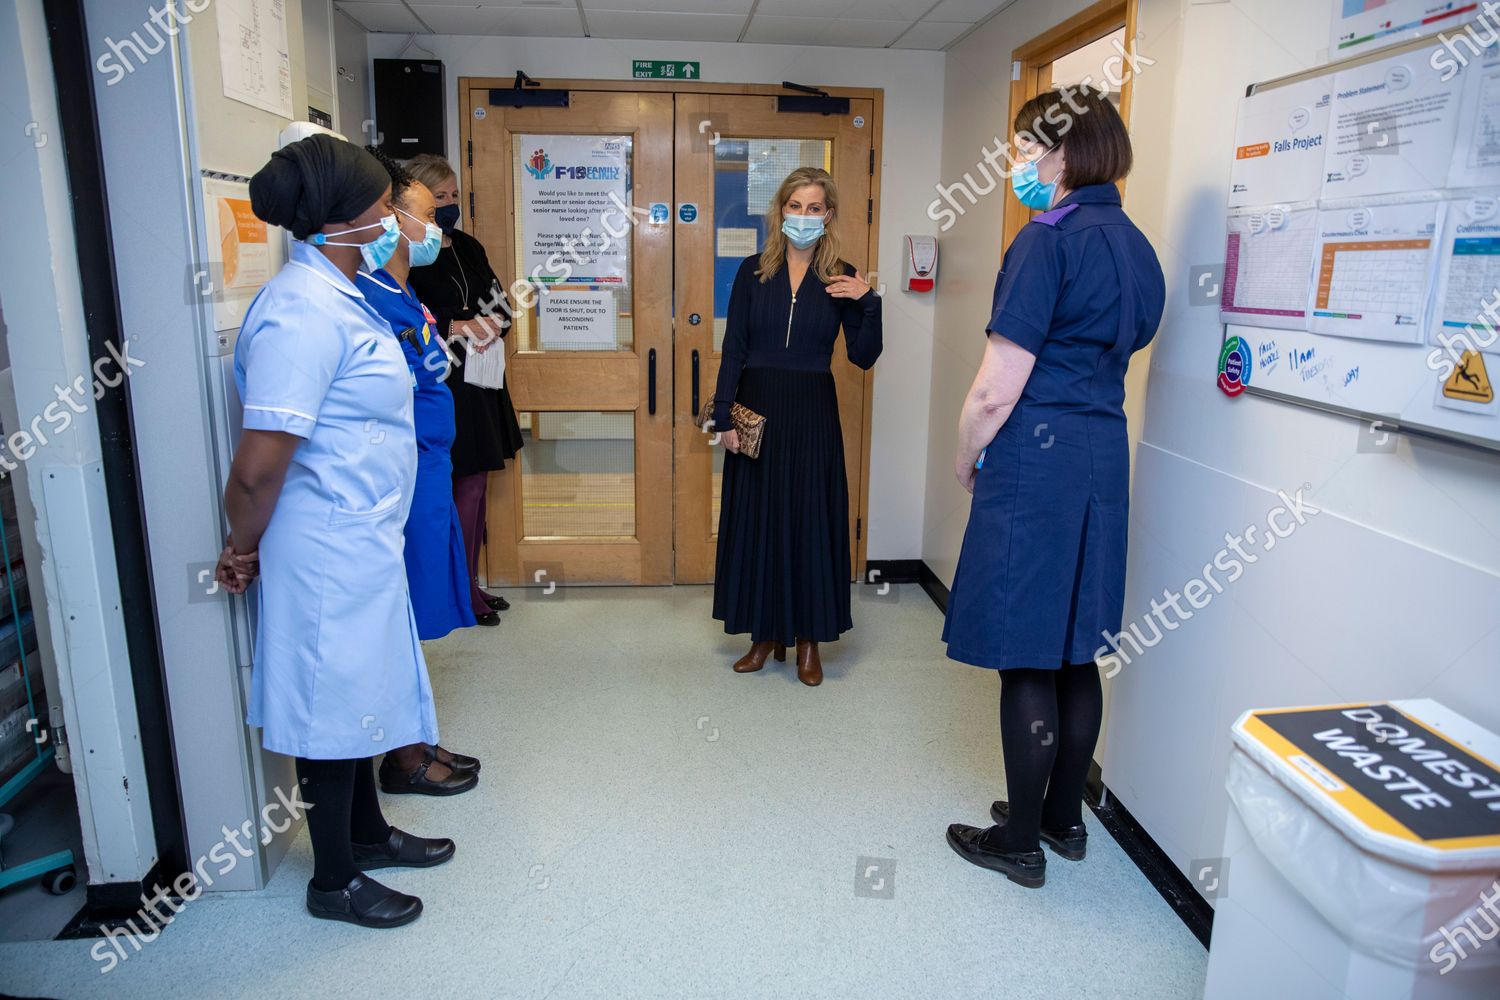 sophie-countess-of-wessex-and-prince-edward-visit-to-frimley-park-hospital-uk-shutterstock-editorial-11900147ak.jpg